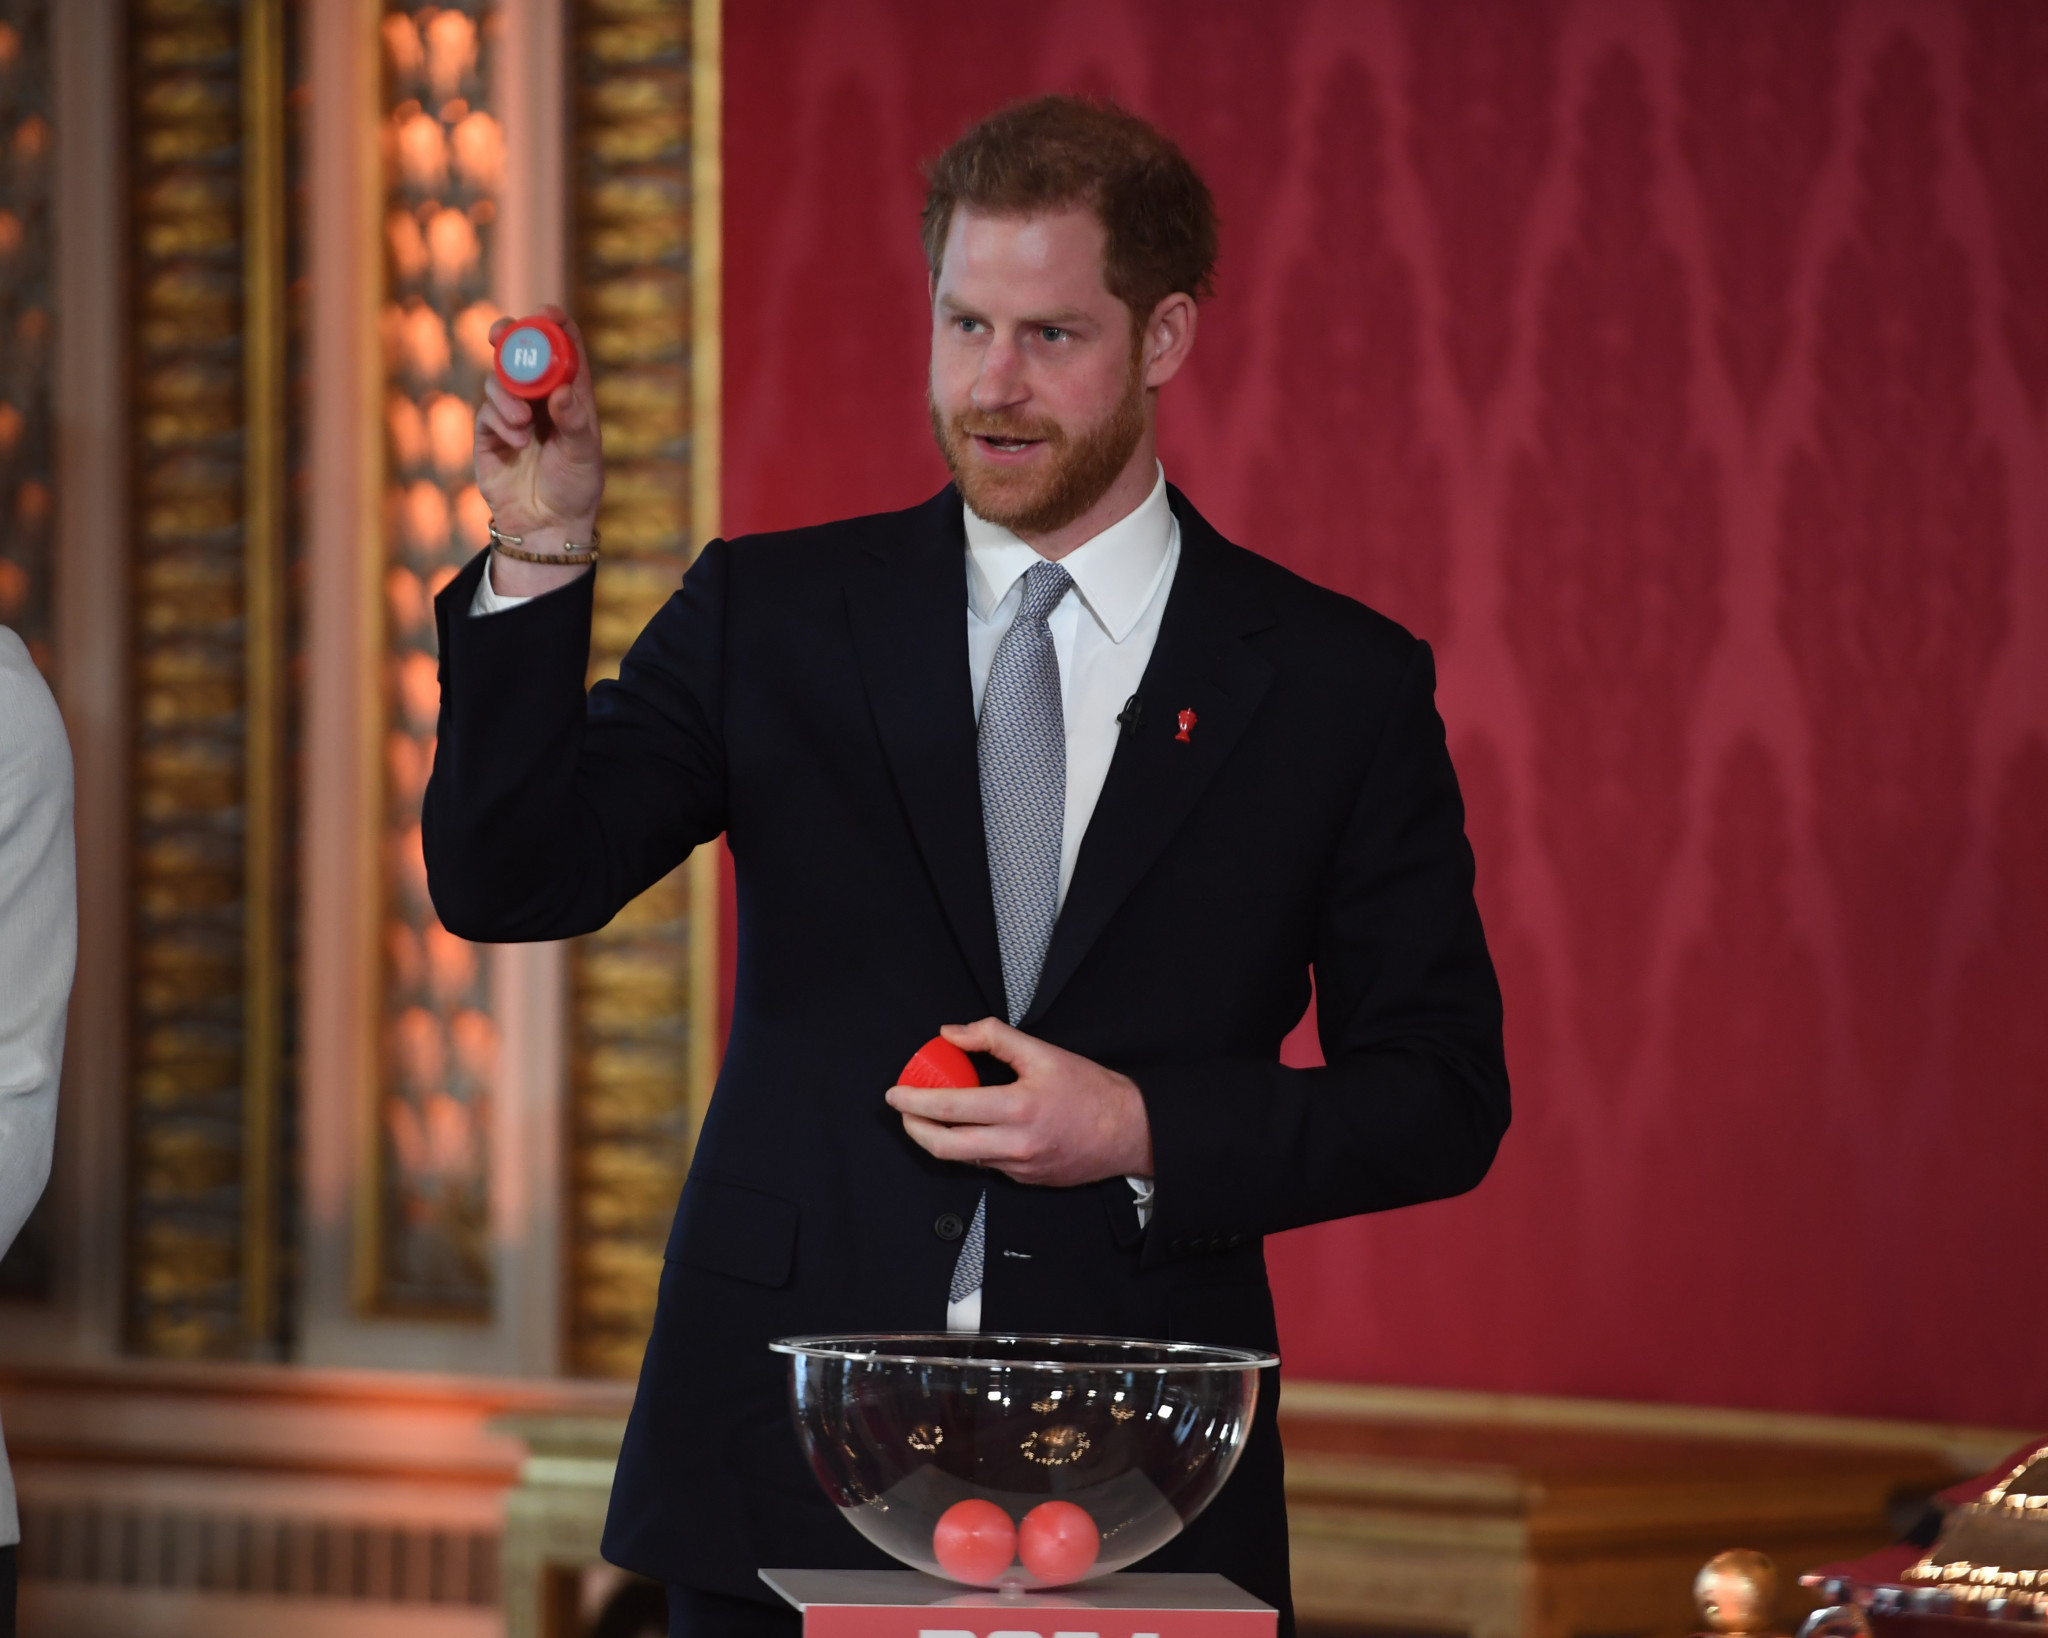 Prince Harry attends draw for 2021 Rugby League World Cup in first public appearance since shock announcement